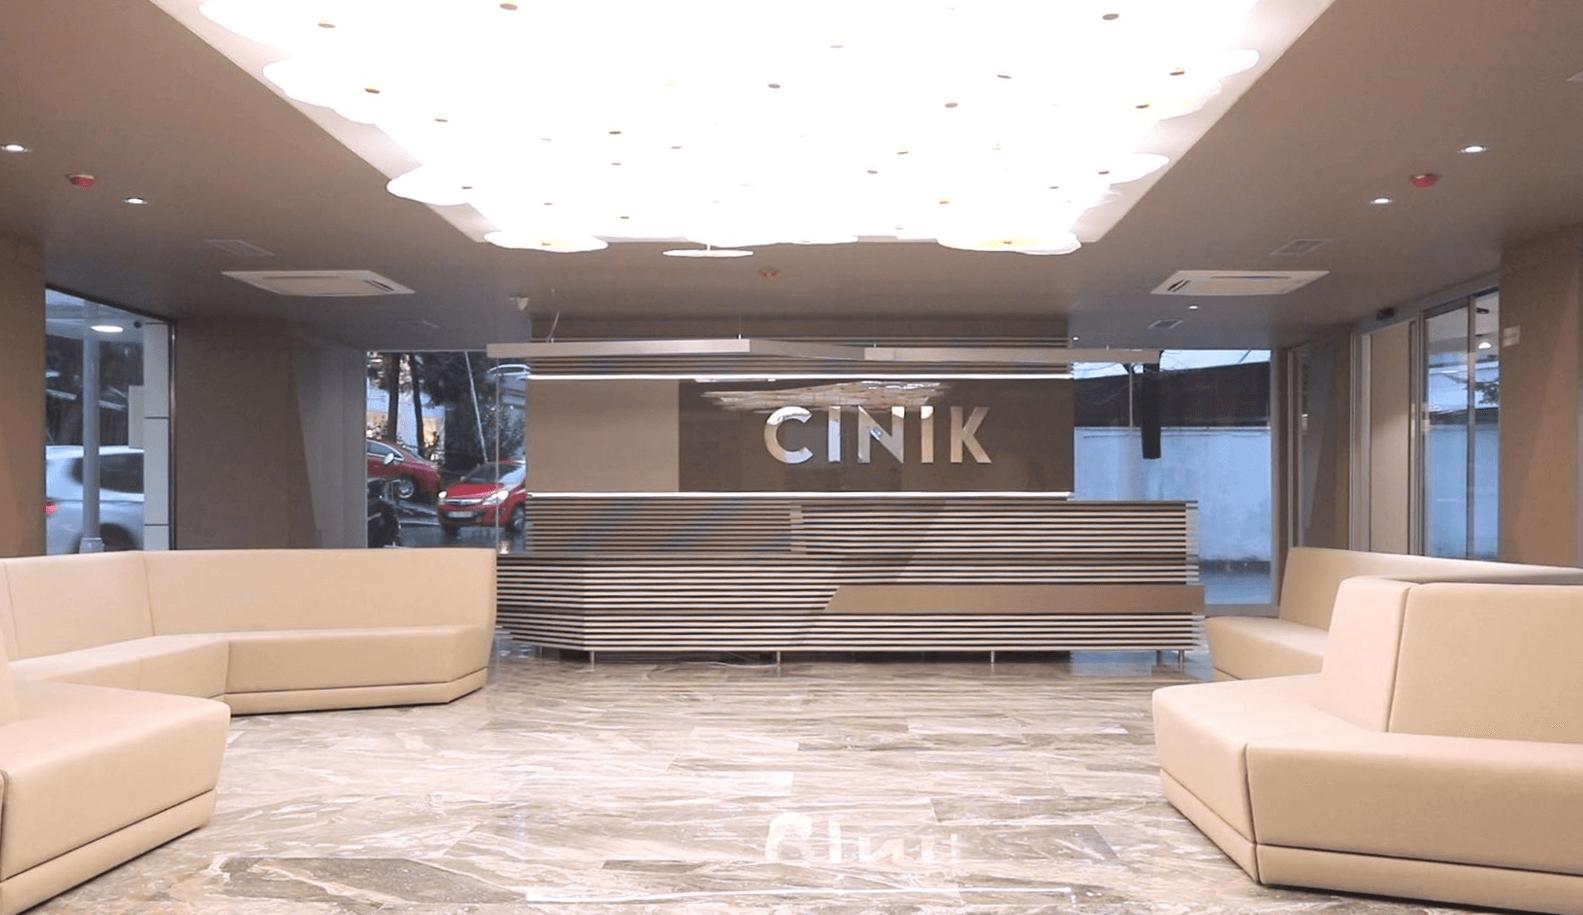 The welcome desk at Dr. Cinik Hair Hospital, Istanbul.